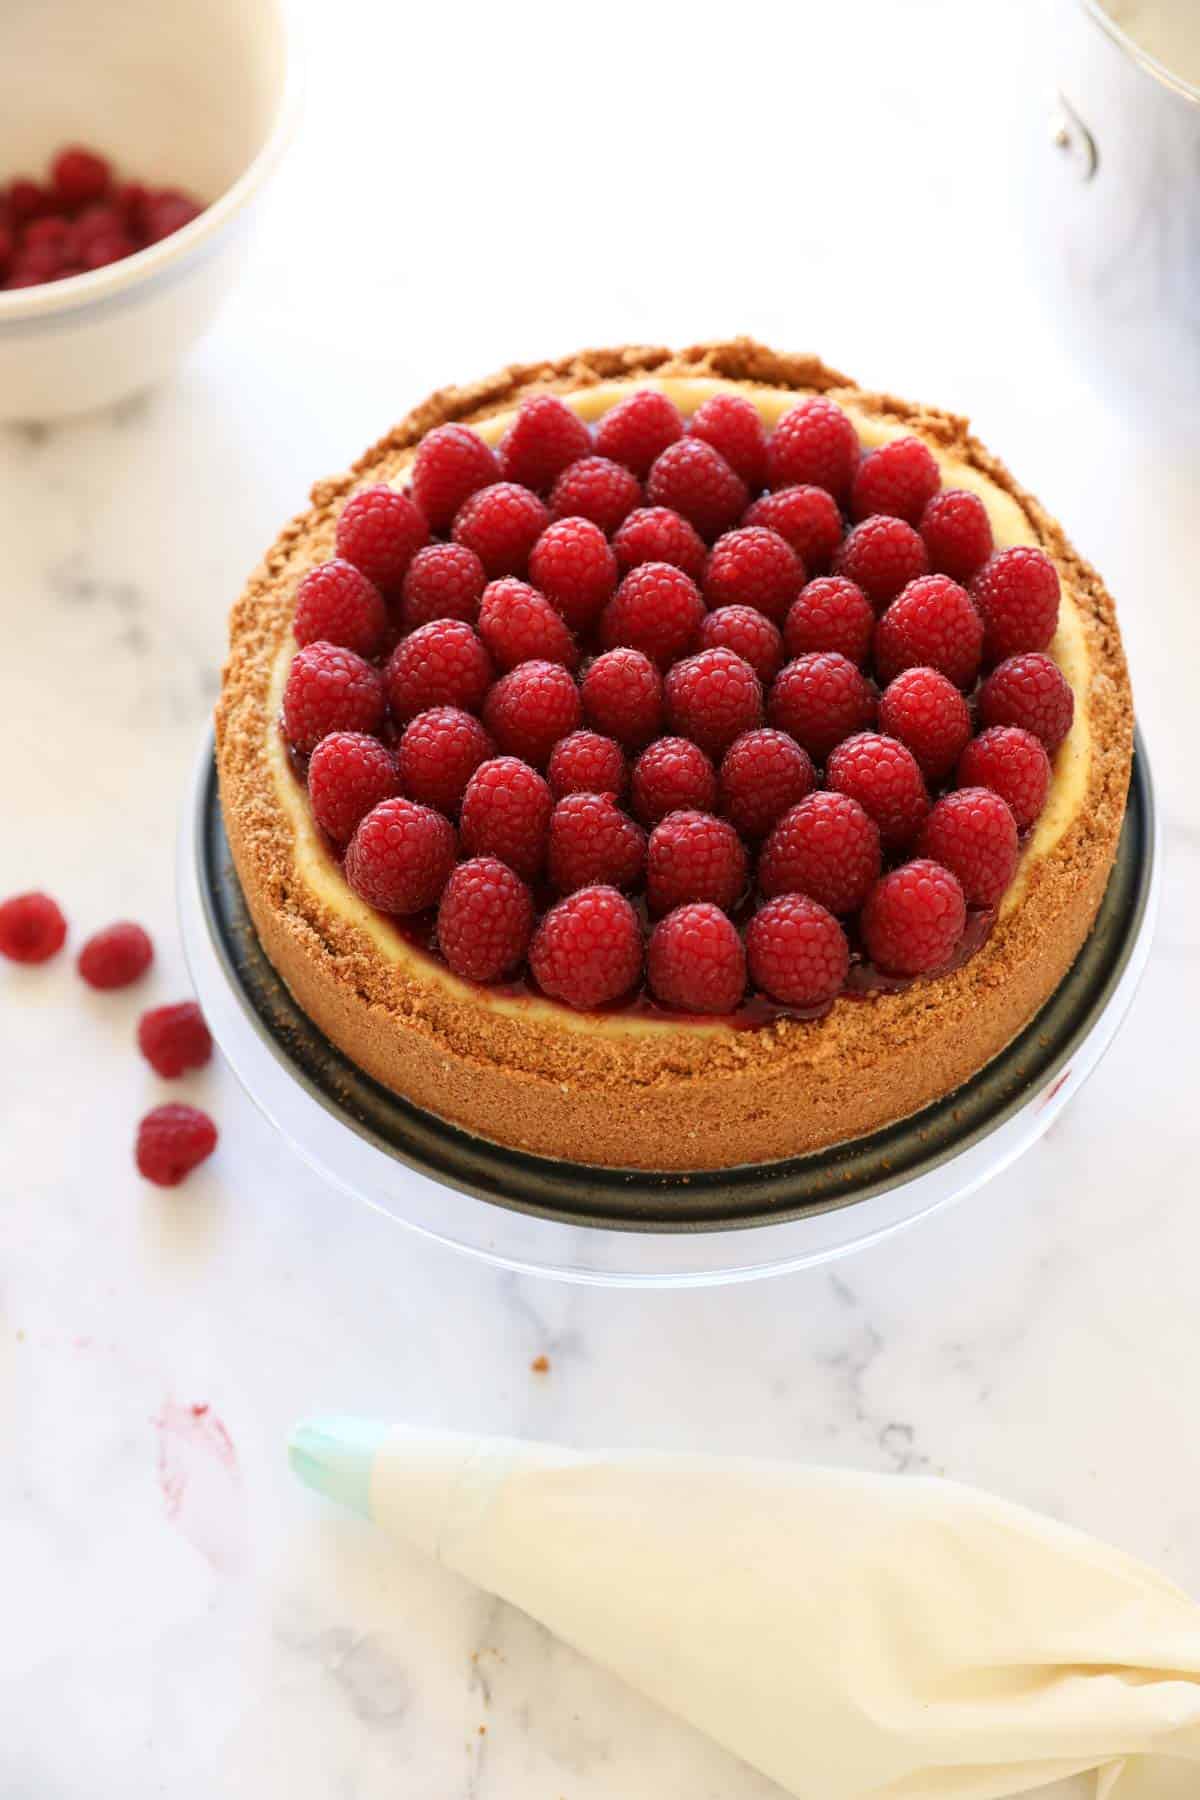 A full raspberry cheesecake decorated with raspberry jam and fresh raspberries on a cake stand